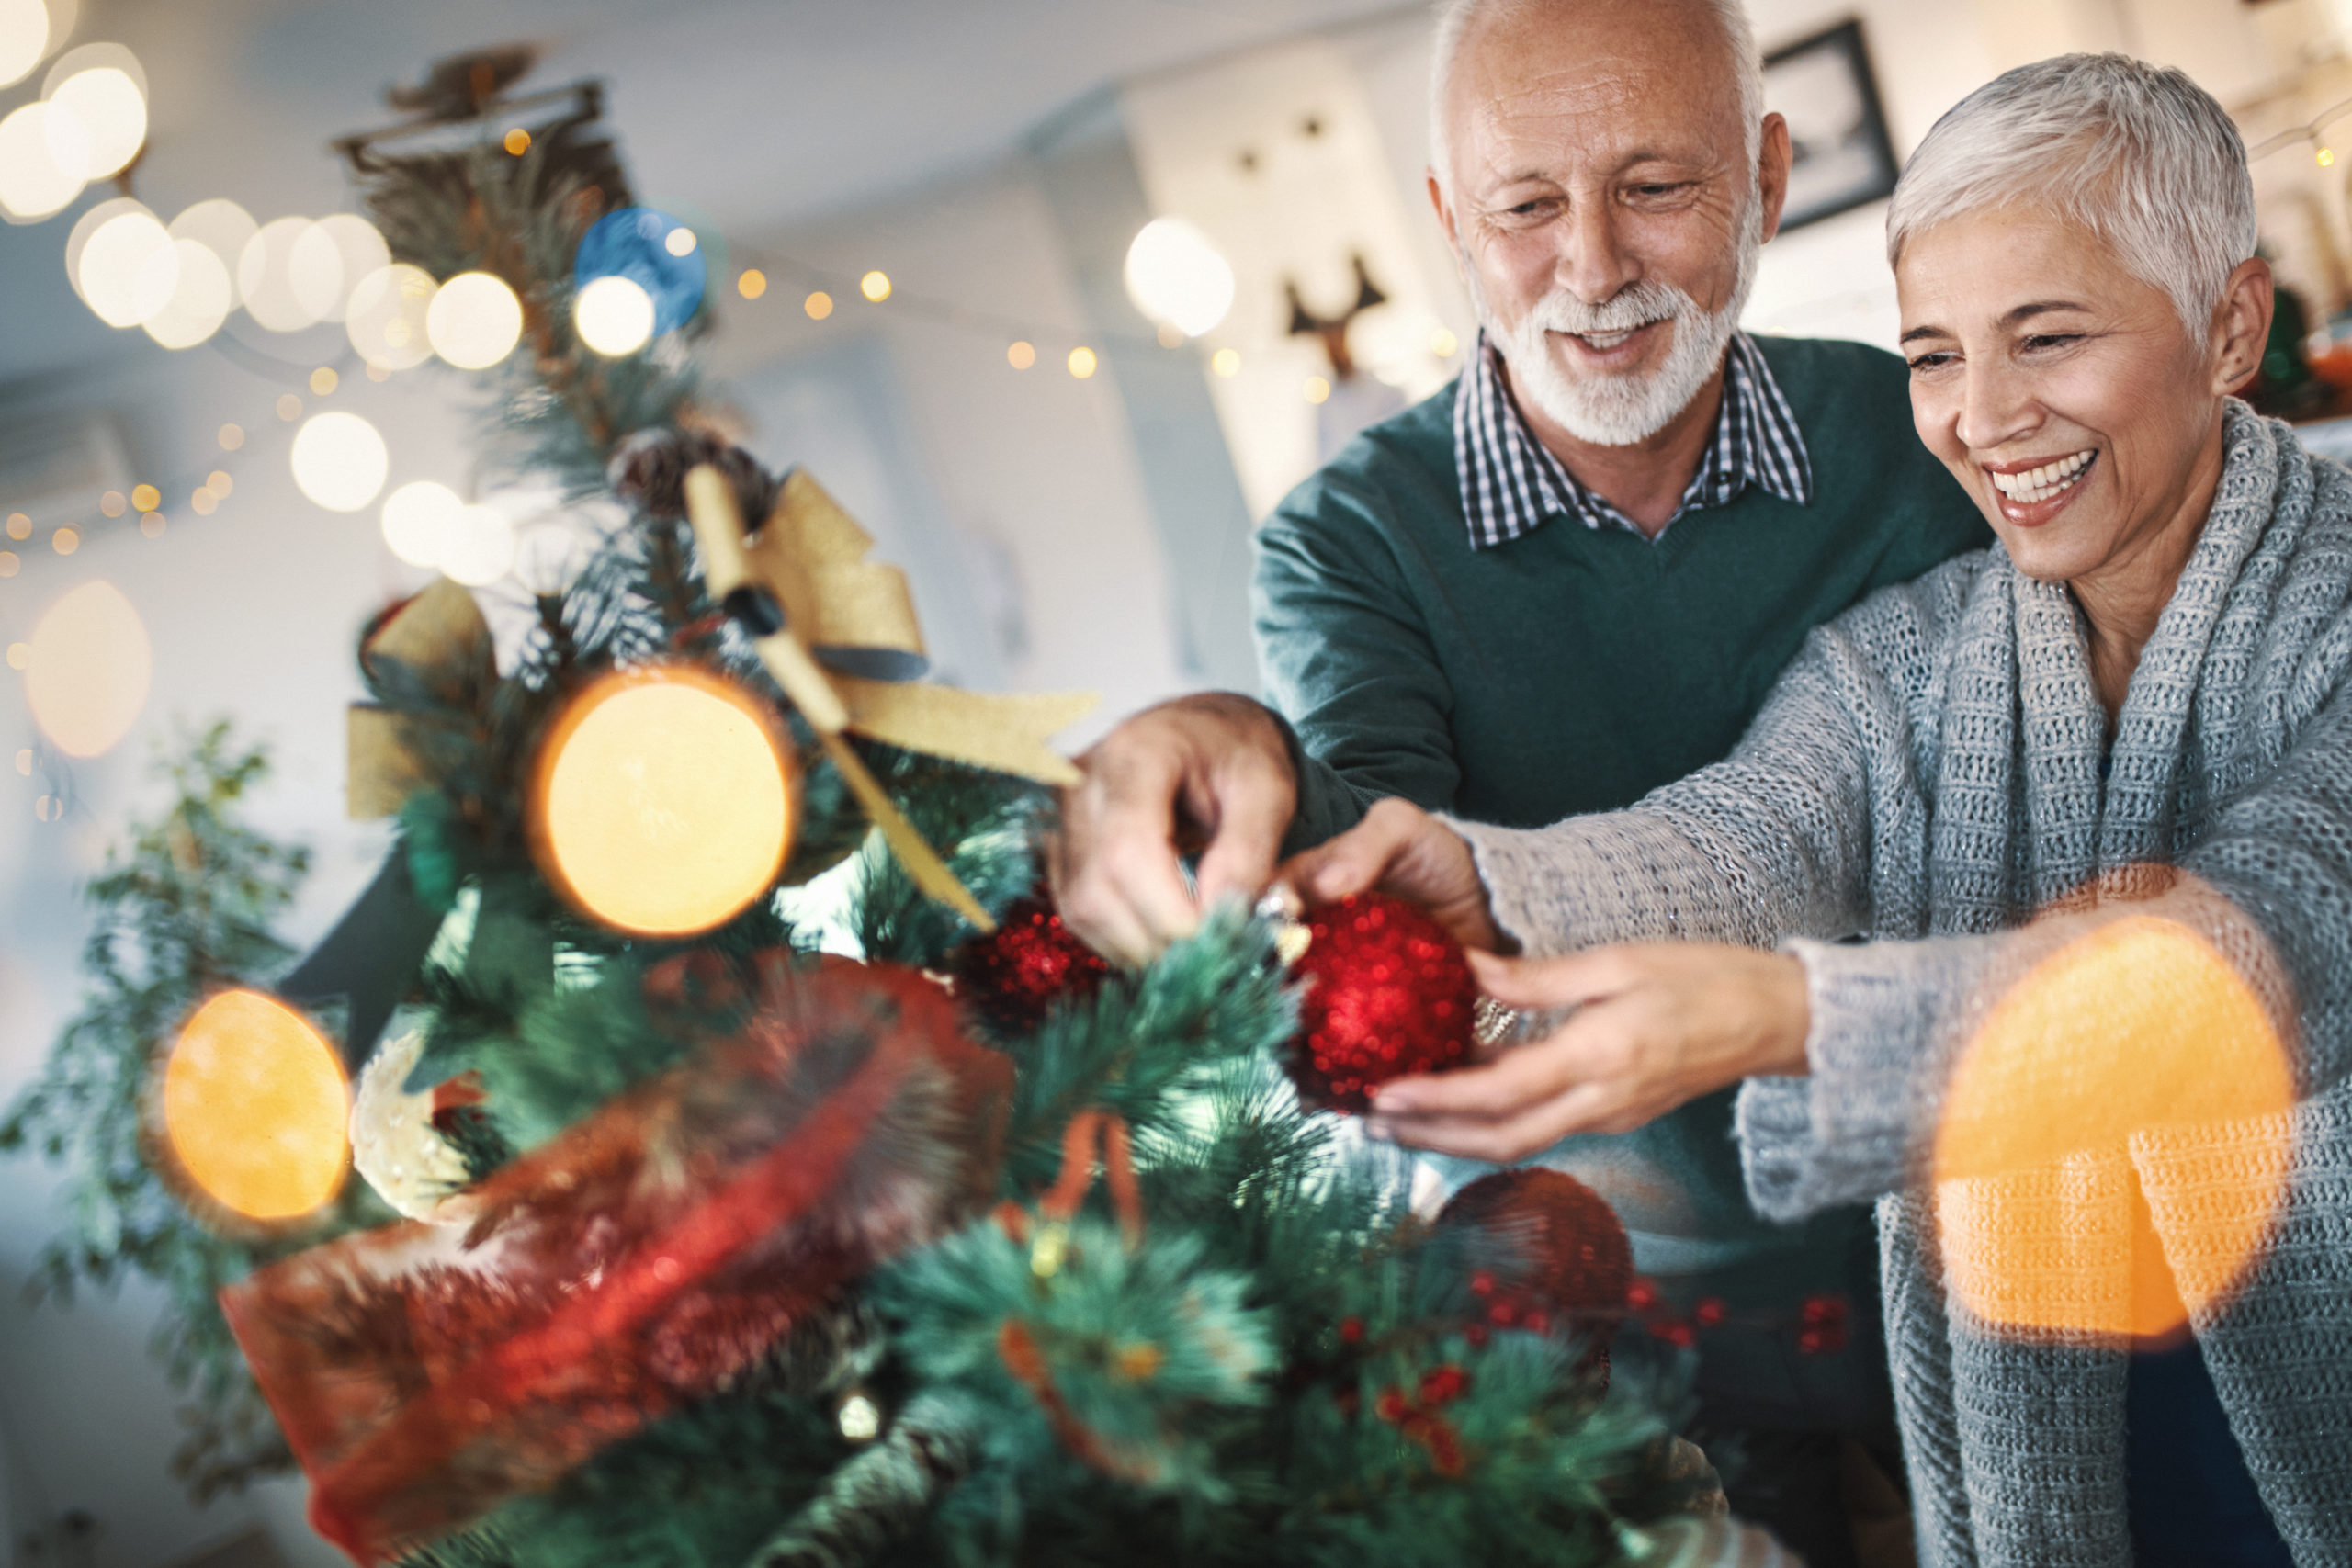 7 healthy holiday tips for seniors